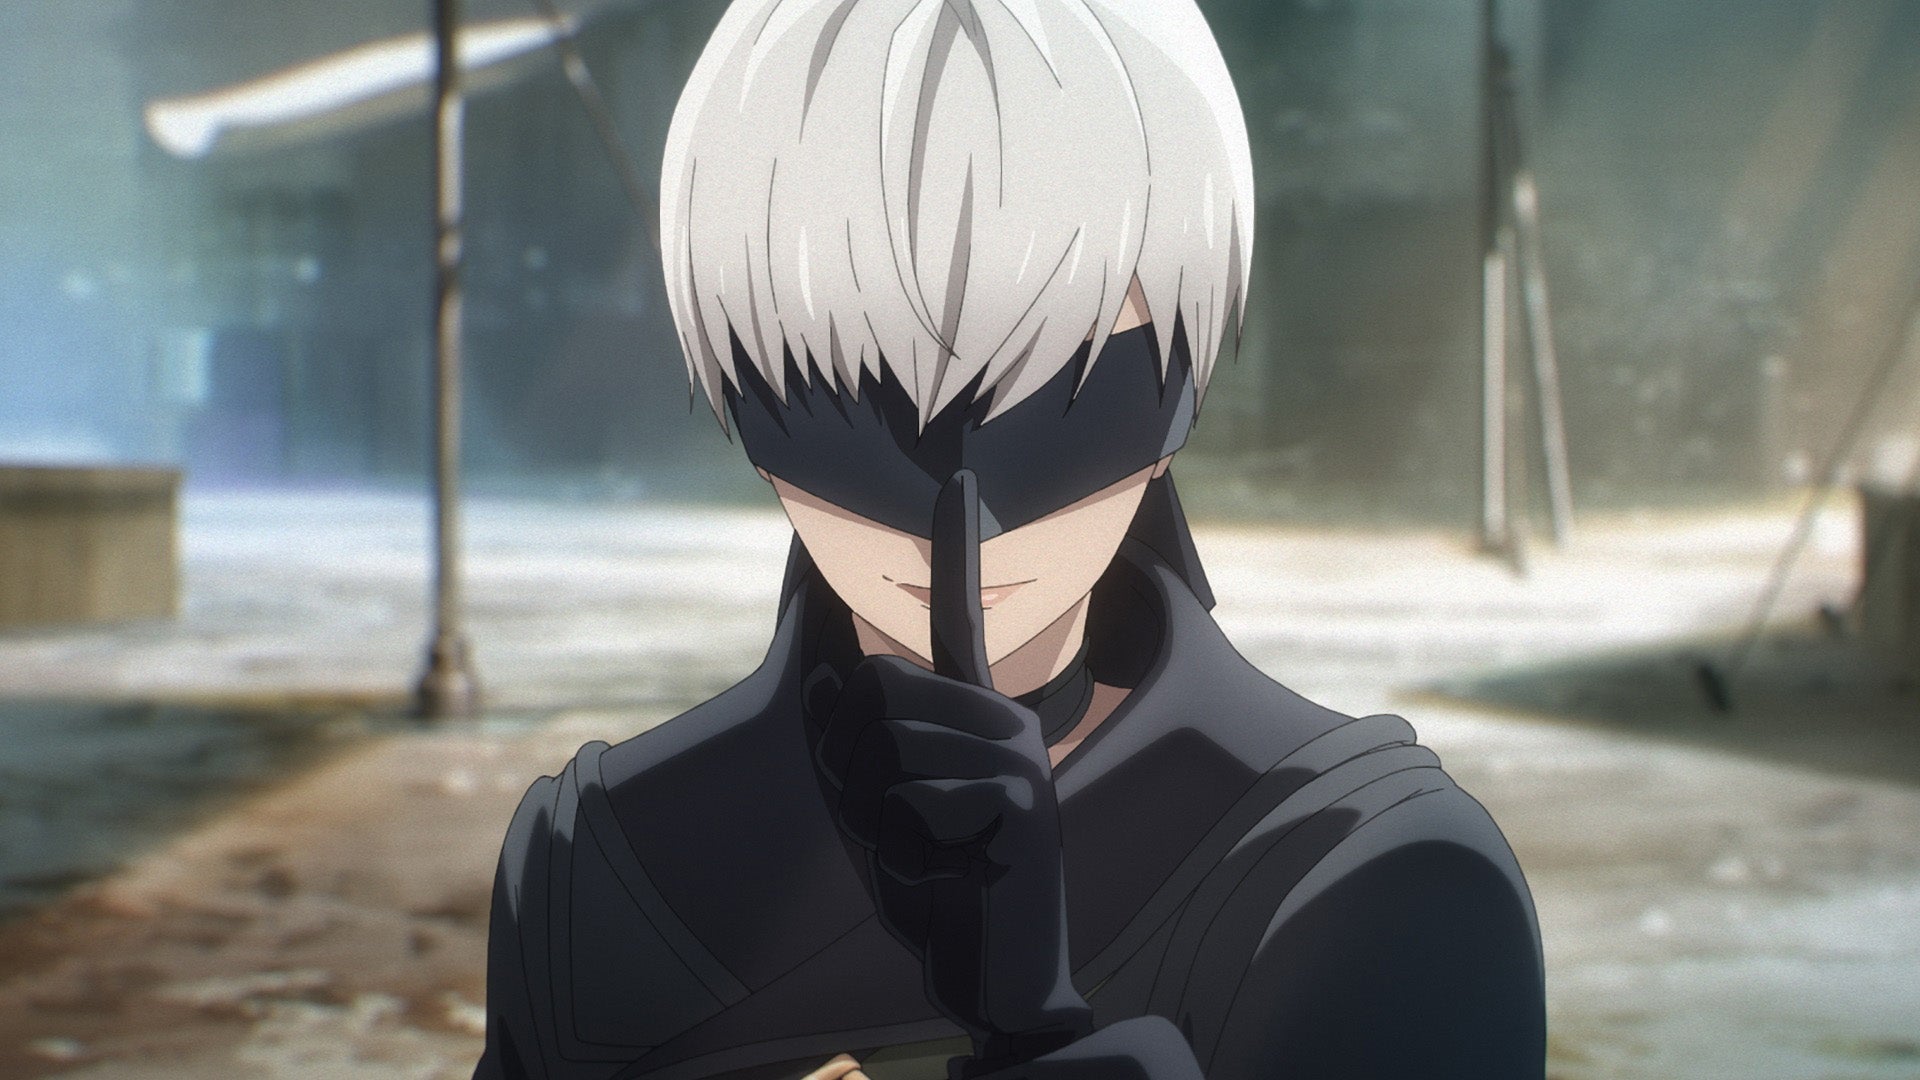 Image for Nier: Automata Ver1.1a anime adaptation pauses production indefinitely